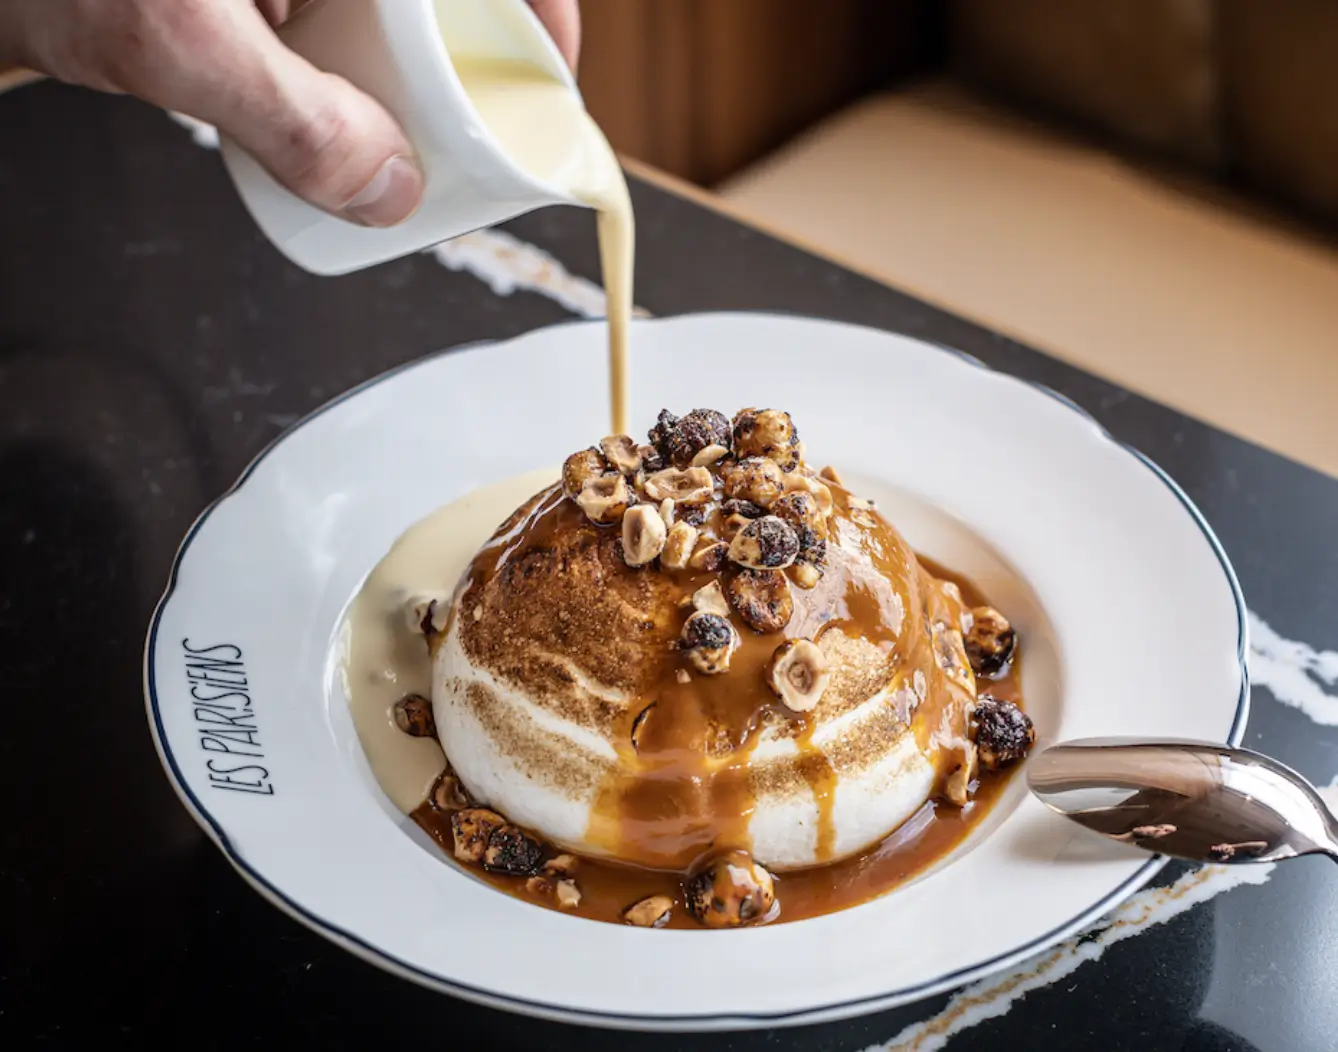 Dessert at Les Parisiens Paris, featuring a panna cotta topped with hazelnuts and caramel sauce, served on a branded plate.